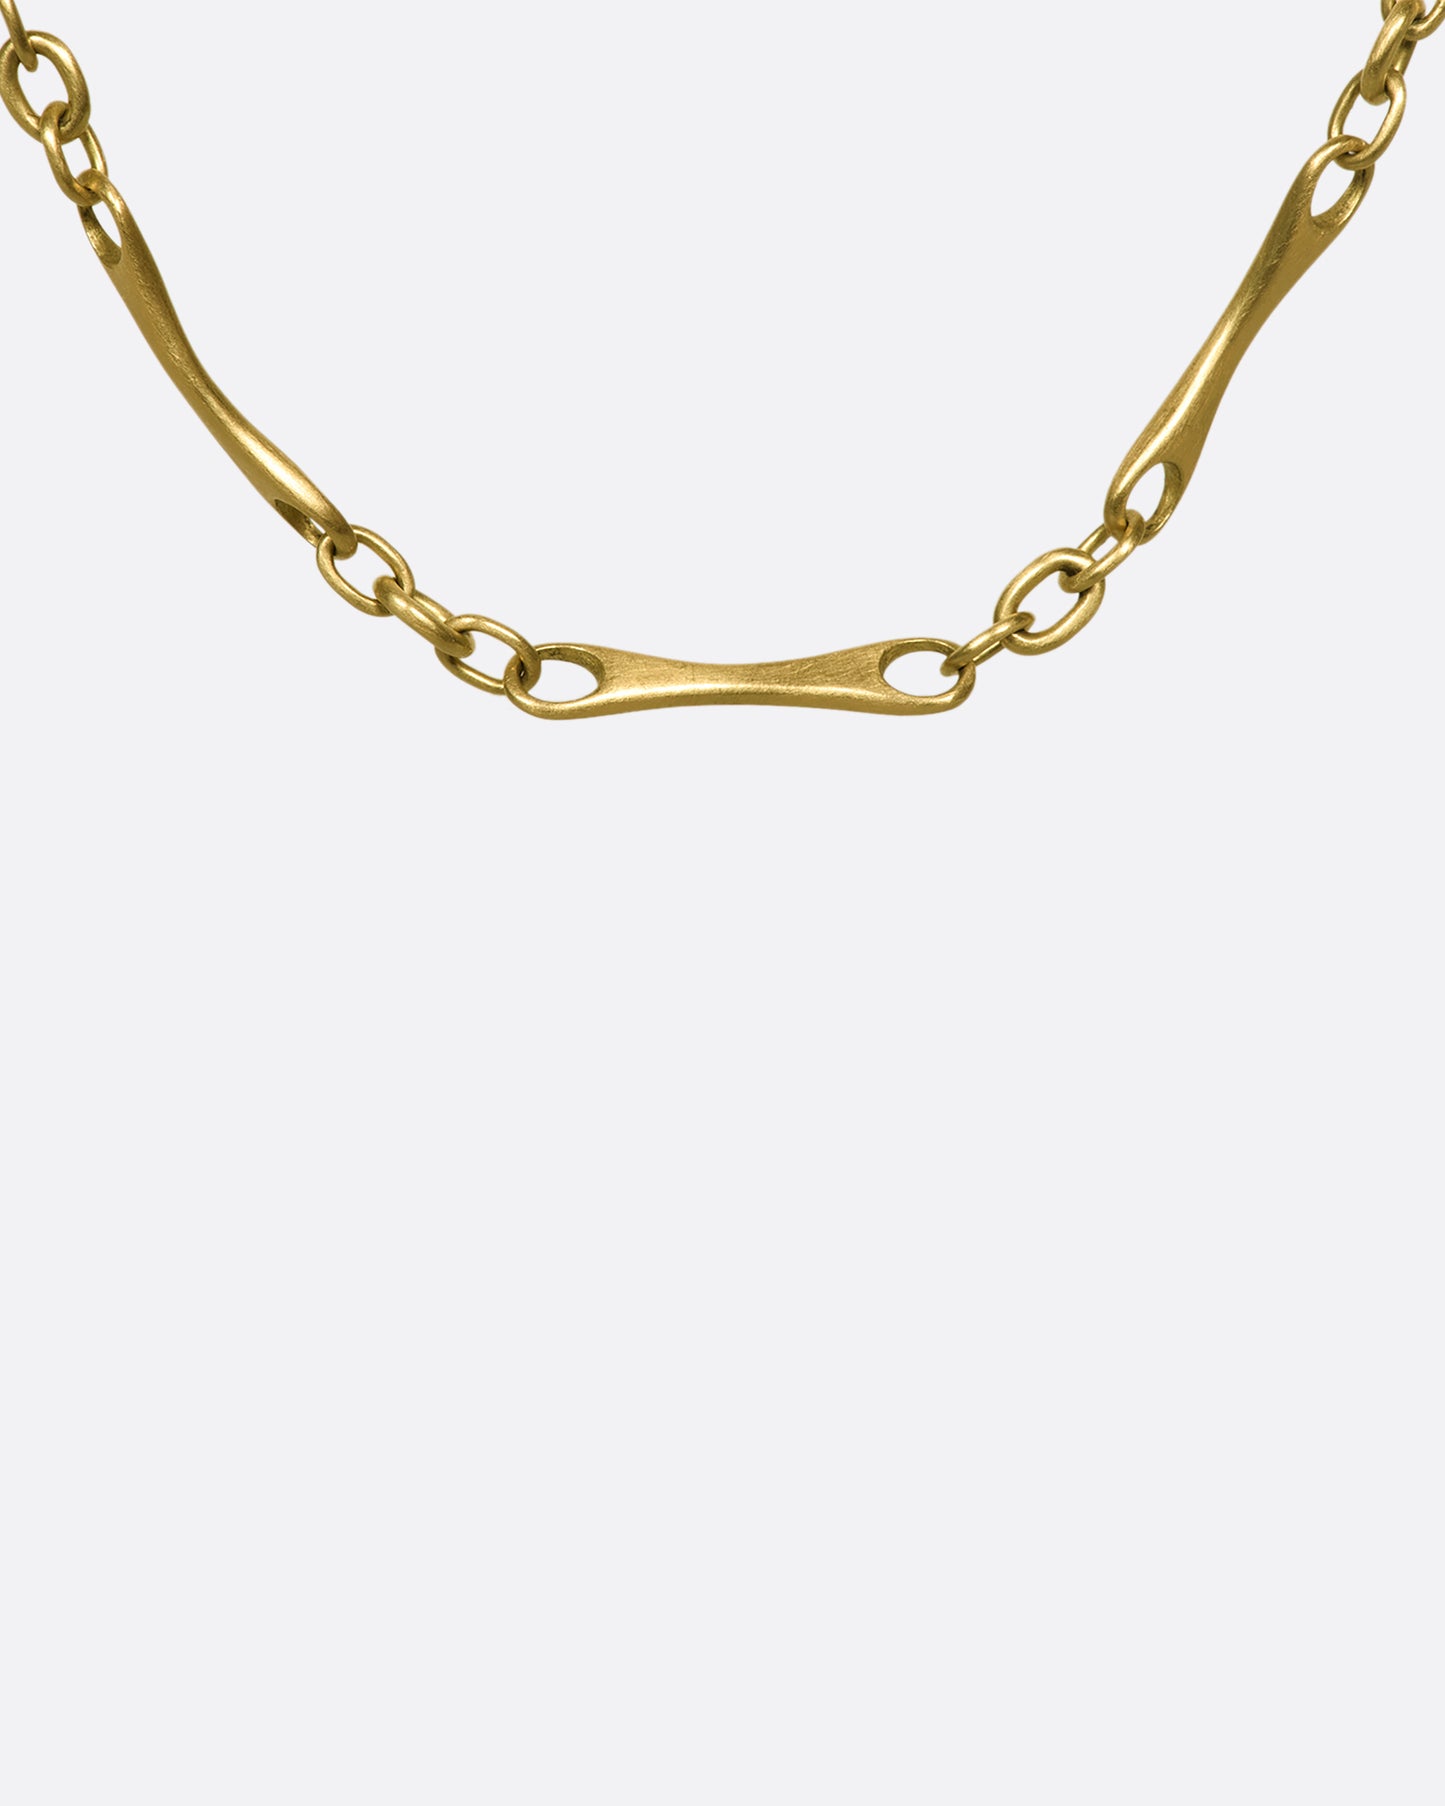 A close up of a section of a gold necklace with elongated links with circular cut outs on each end.